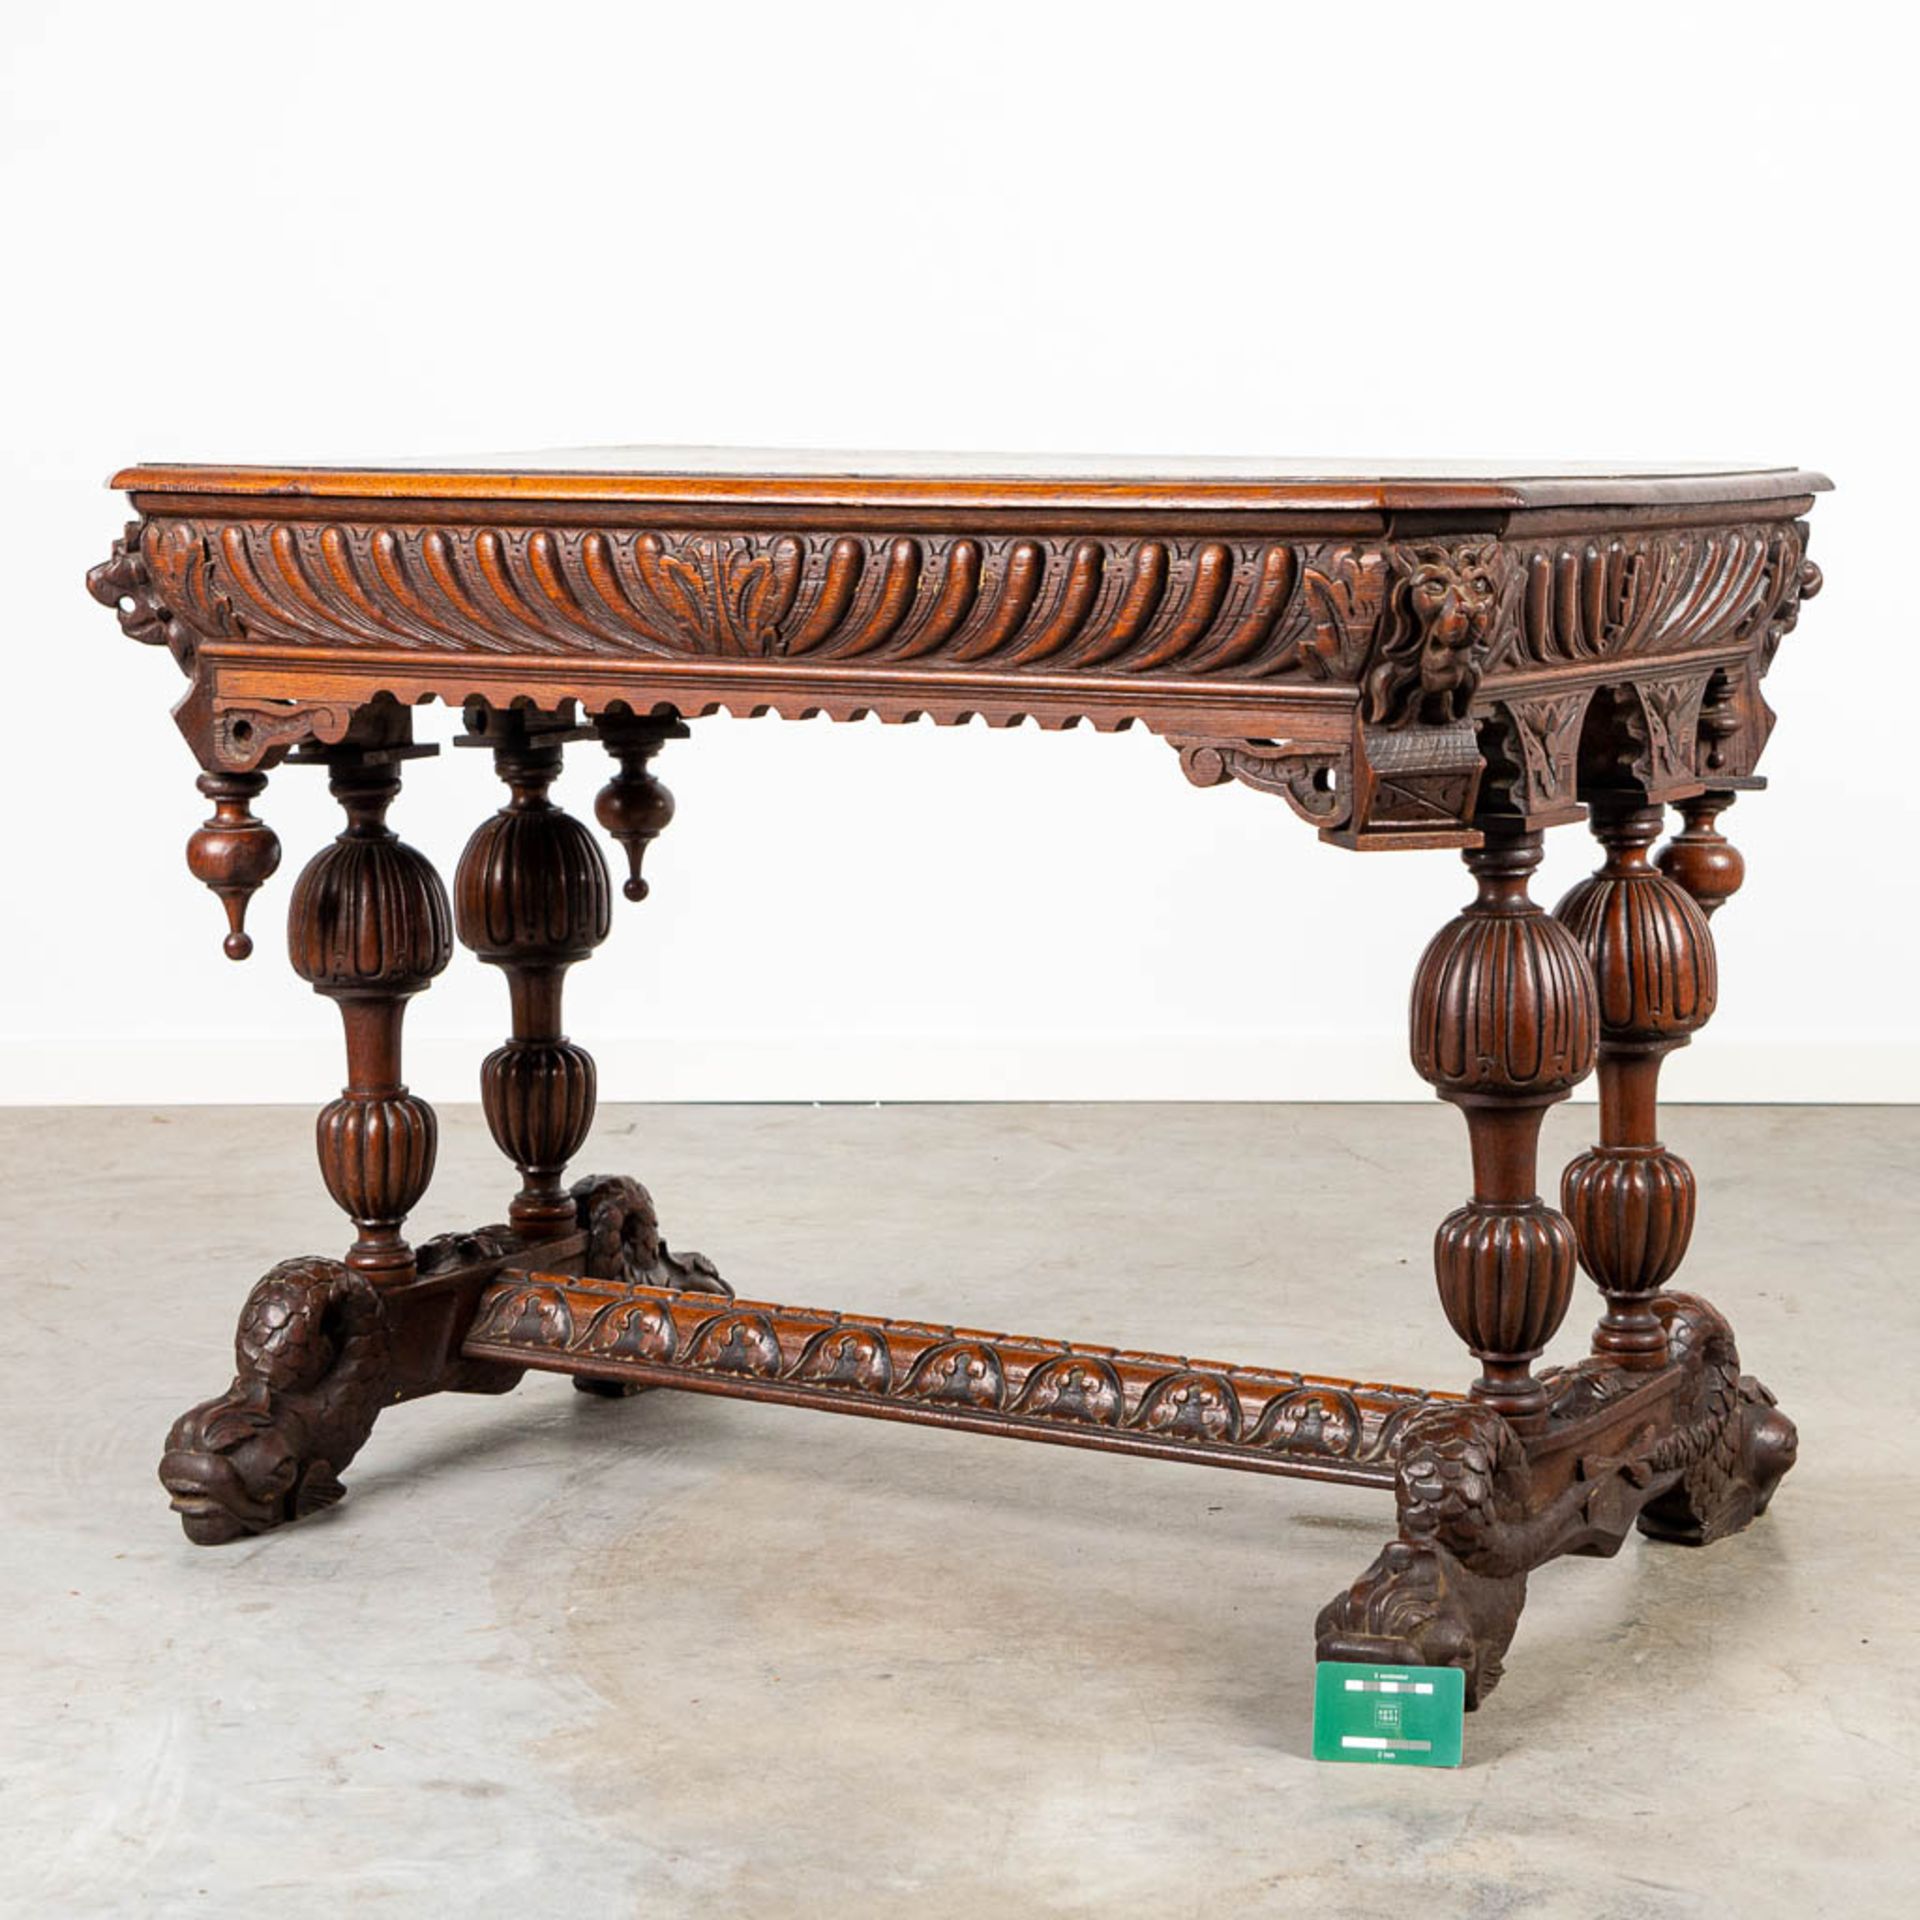 A desk made of oak and decorated with wood sculptured Dolphins. - Image 4 of 9